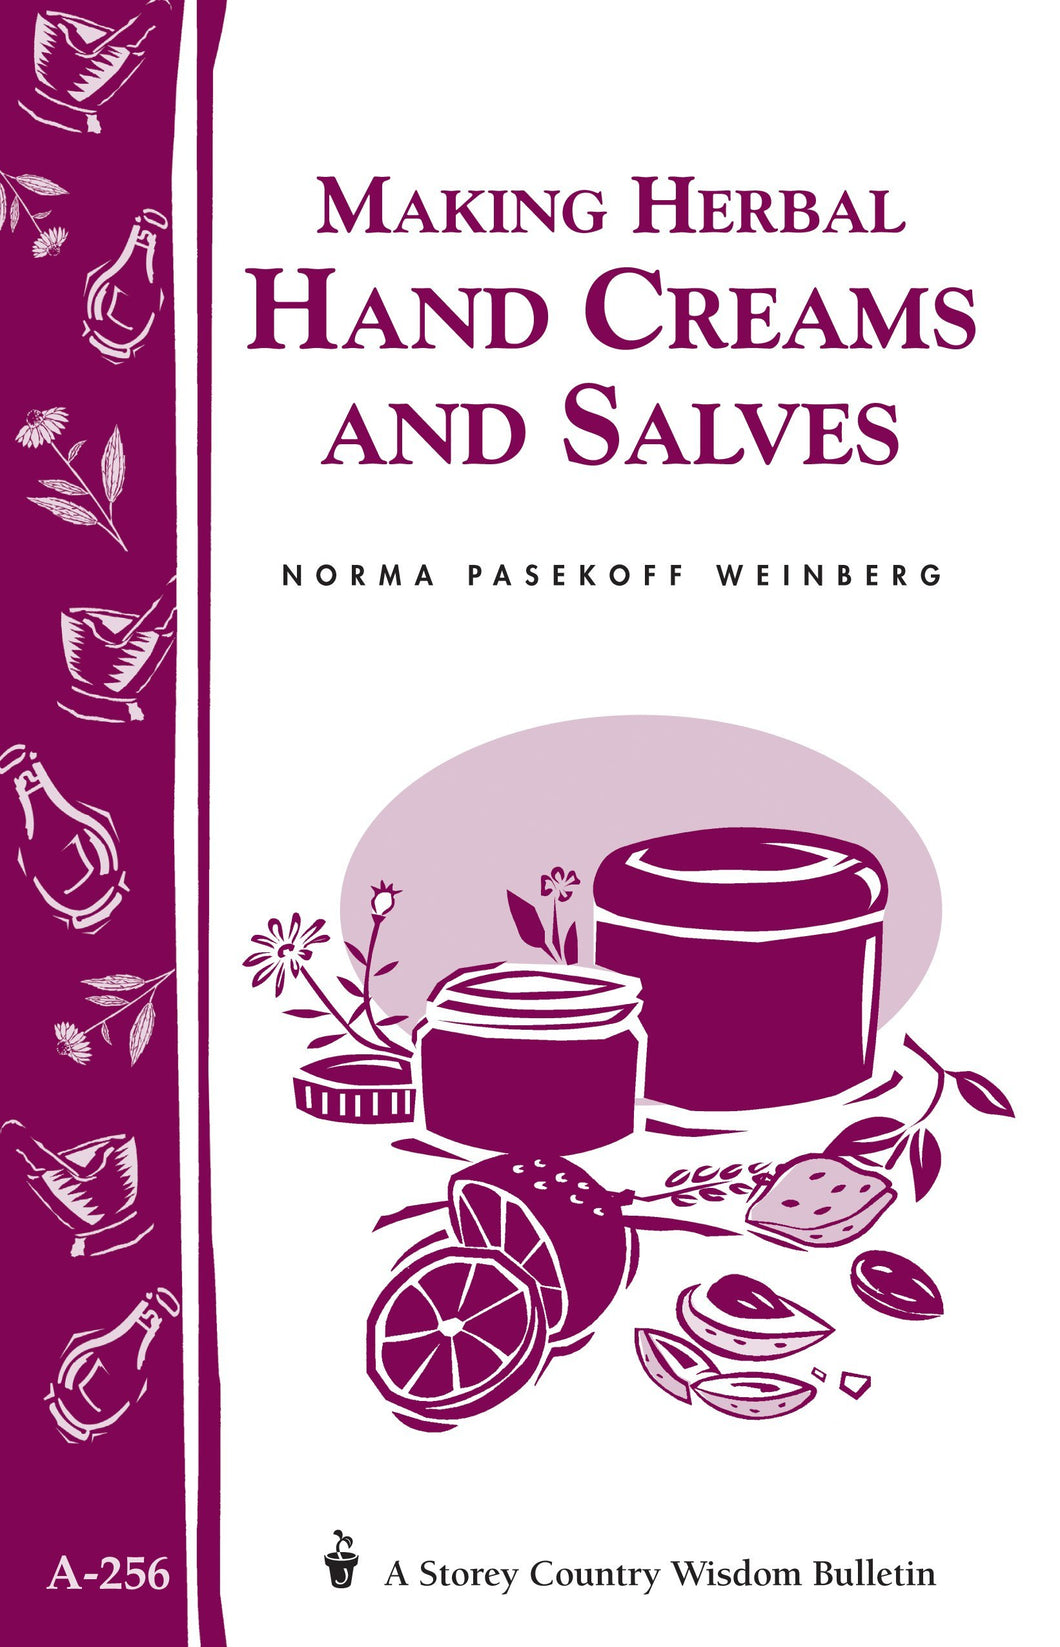 MAKING HERBAL HAND CREAMS AND SALVES A-256